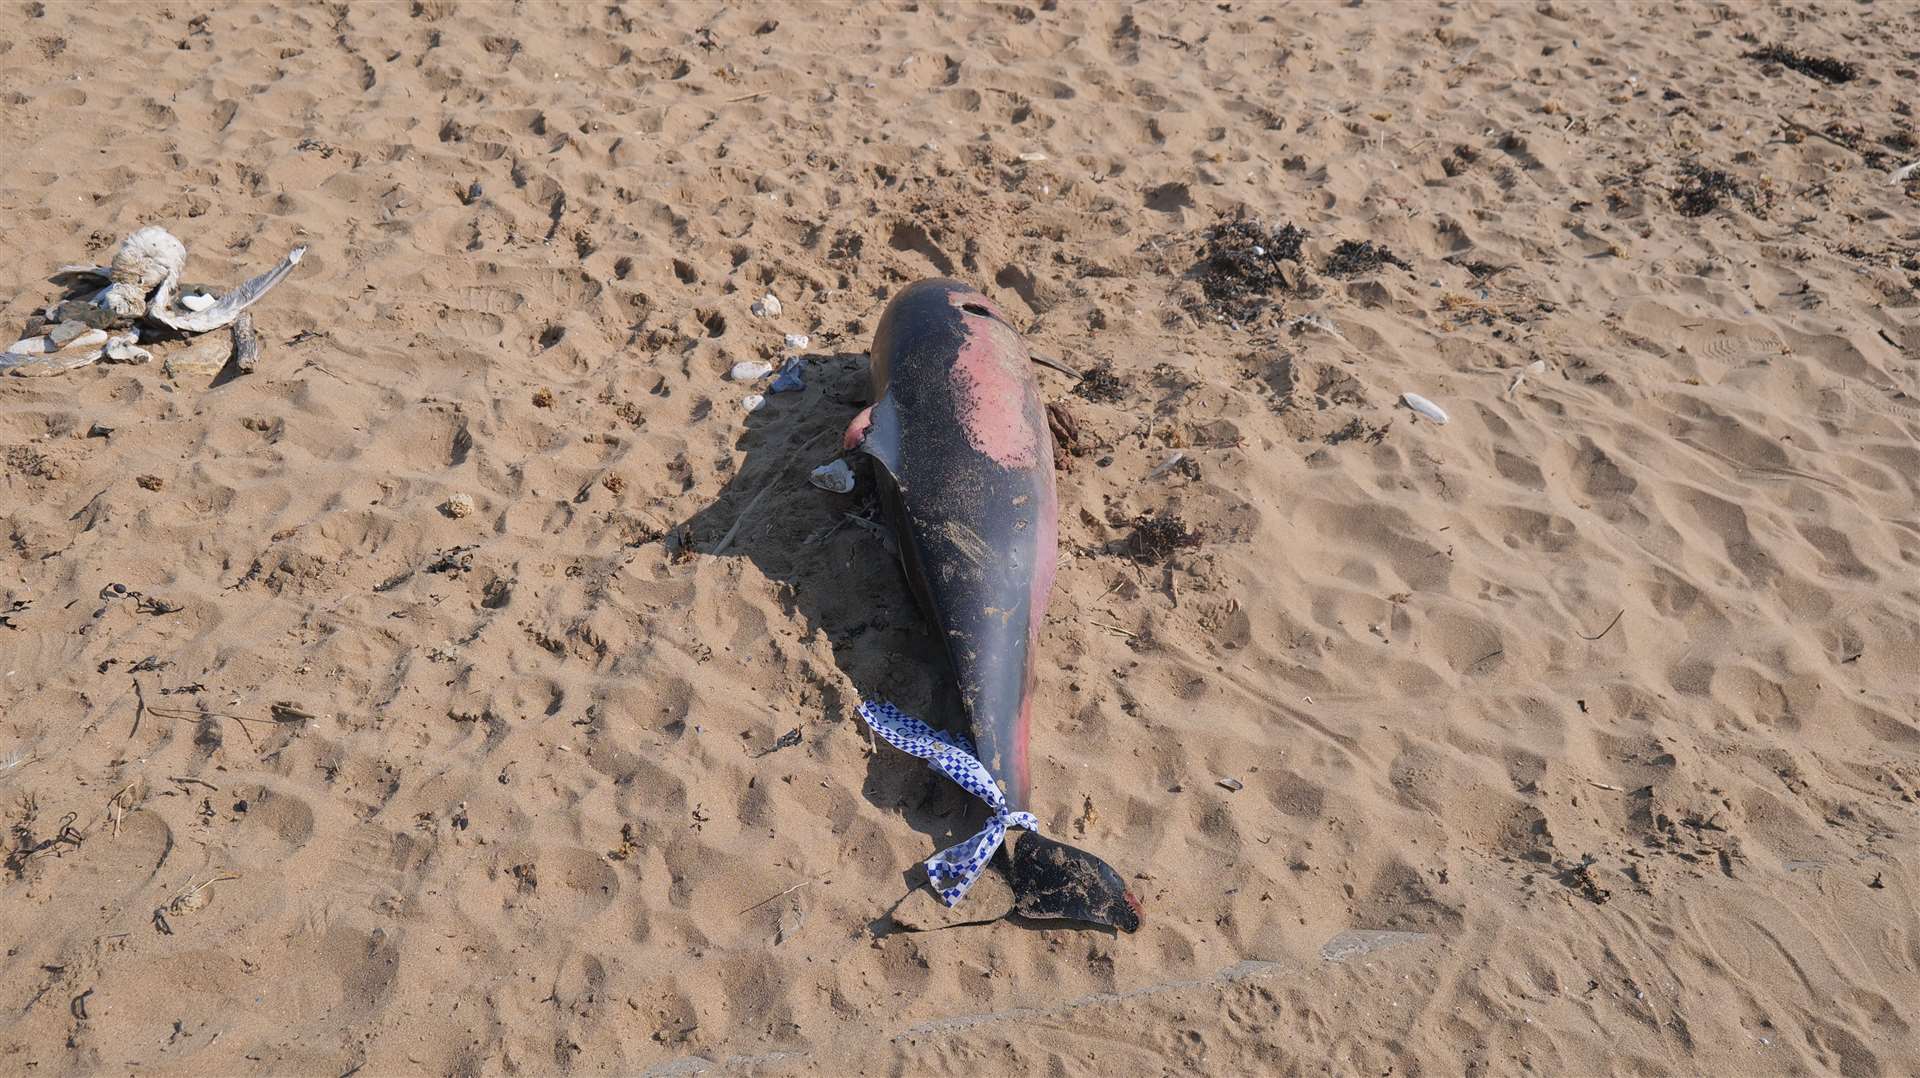 The porpoise was found on Palm Bay beach, Margate. Picture: Hilton Bellinger